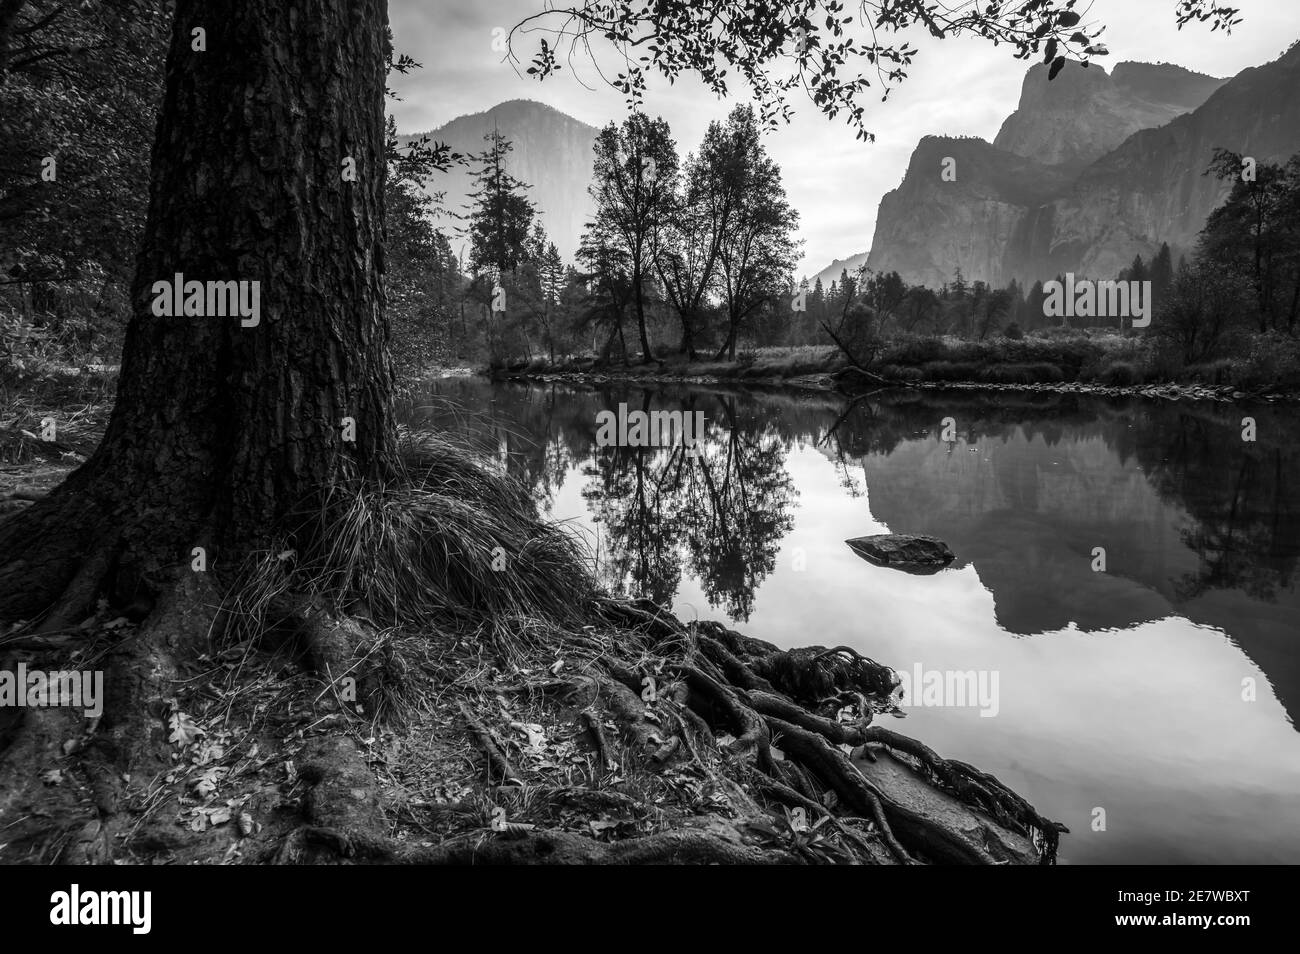 Trees by bank of Merced River at Yosemite National Park Stock Photo